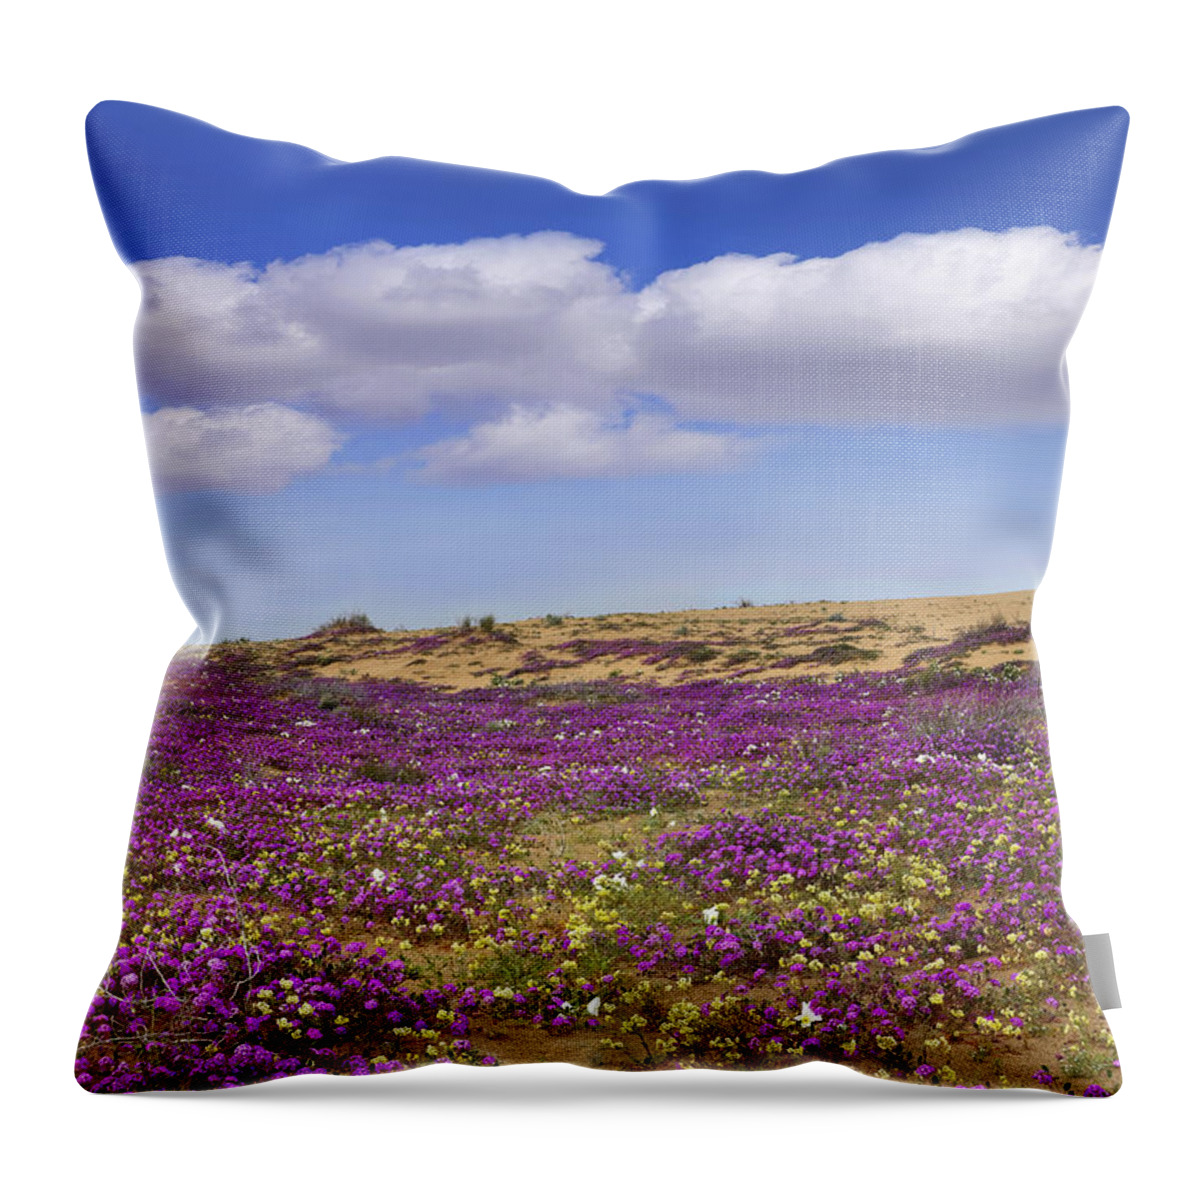 00175207 Throw Pillow featuring the photograph Sand Verbena Carpeting The Dune by Tim Fitzharris